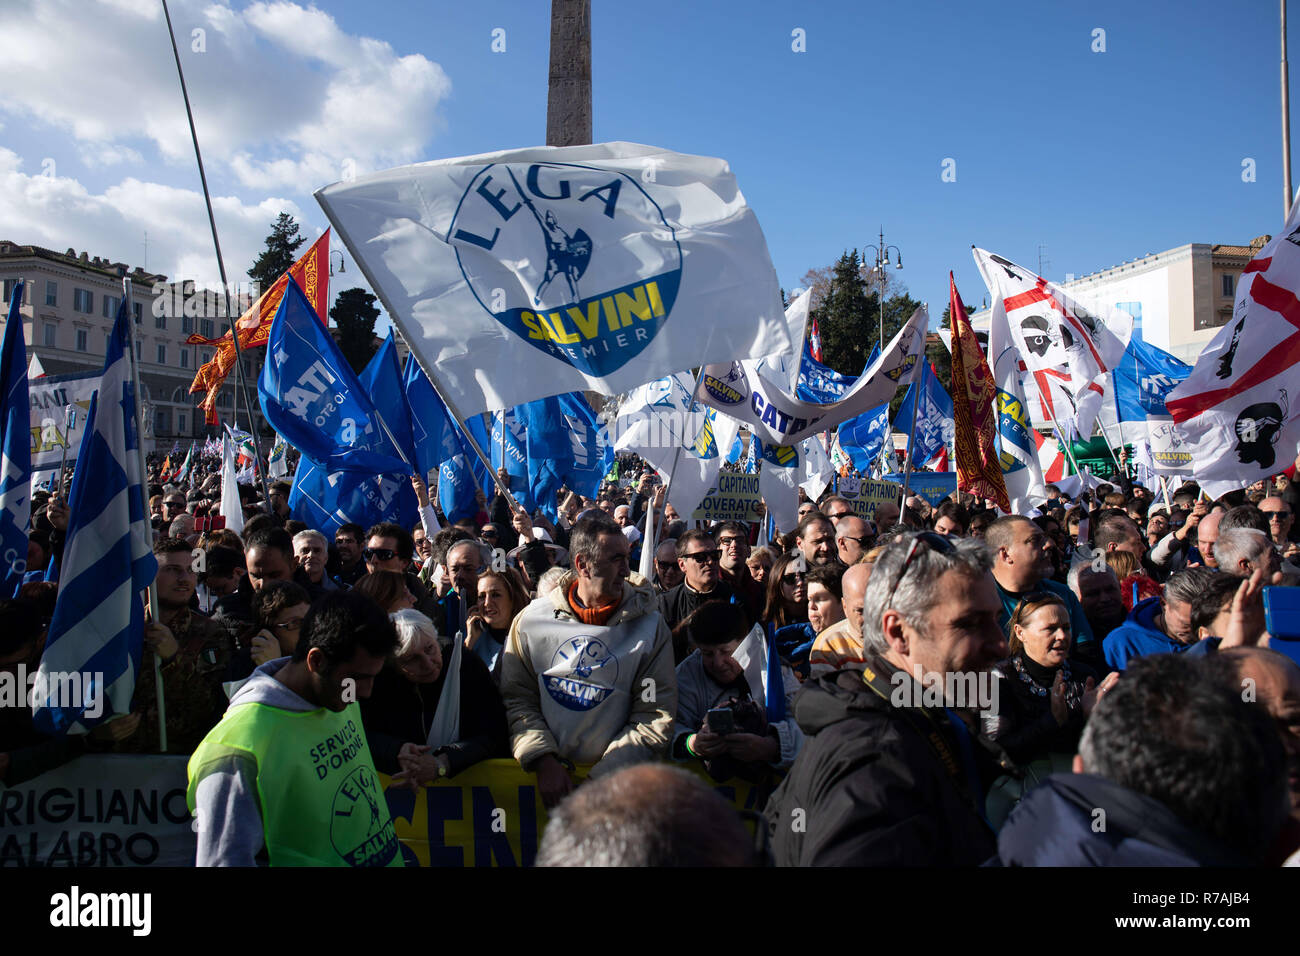 Roma, Roma, Italy. 8th Dec, 2019. People seen waving flags and banner during the event.The league party (La lega) held a political rally with the phrase ''Italy lift your head'' at Piazza del Popolo square in Rome, Italy. According to the organizers, 80 thousand people attended. The party's representatives explained the plans and ideas of the party about the future of the country. Credit: SOPA Images/ZUMA Wire/Alamy Live News Stock Photo